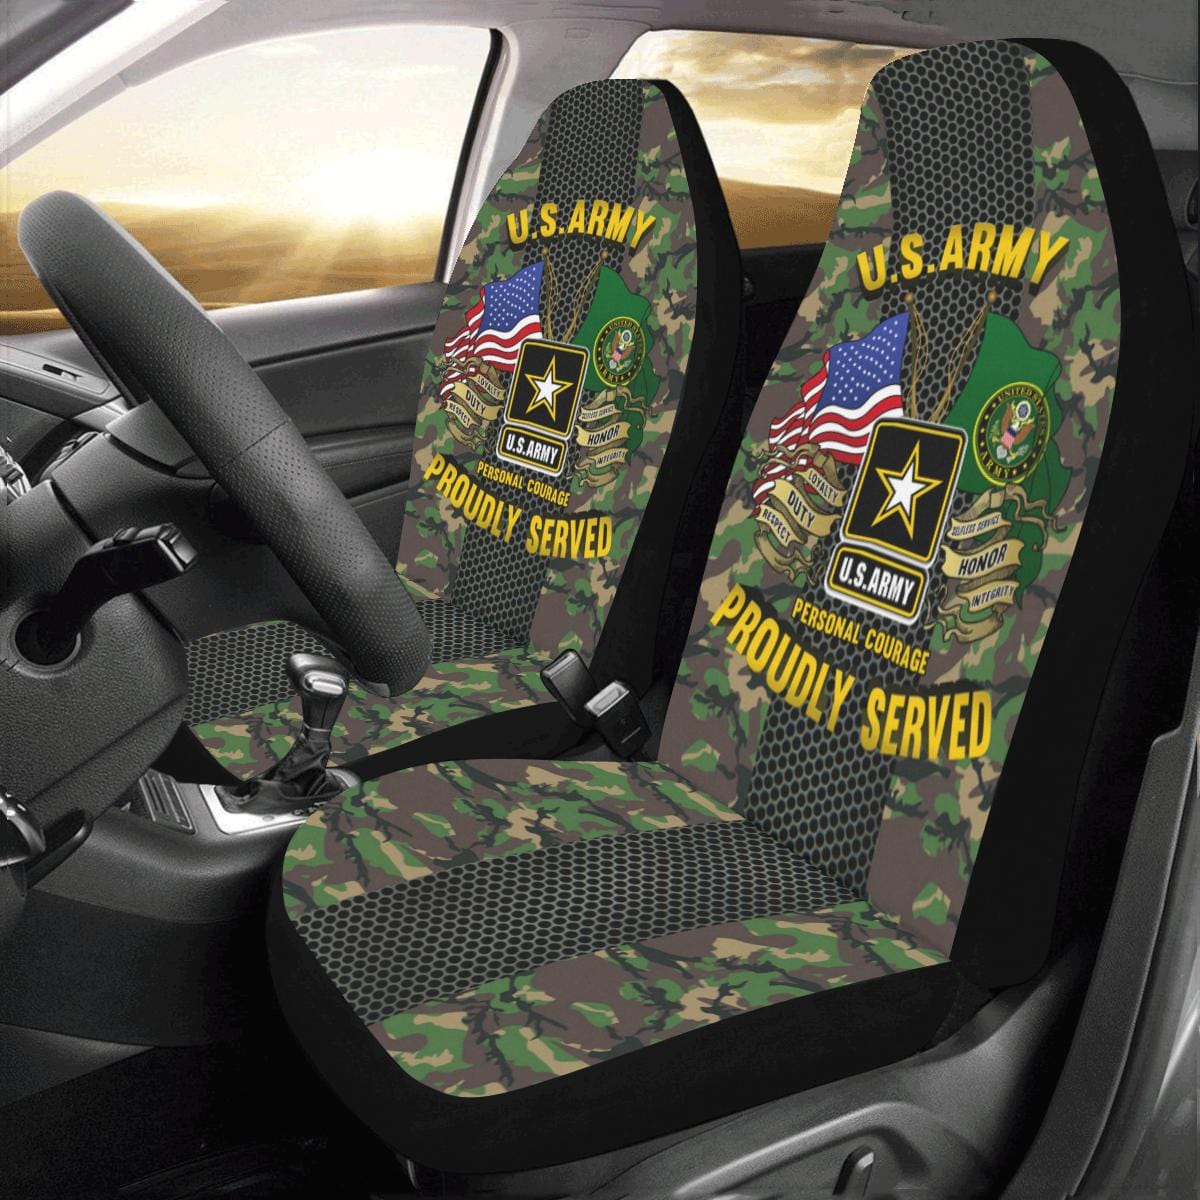 U.S ARMY Logo - CAR SEAT COVERS (SET OF 2)-SeatCovers-Army-Logo-Veterans Nation